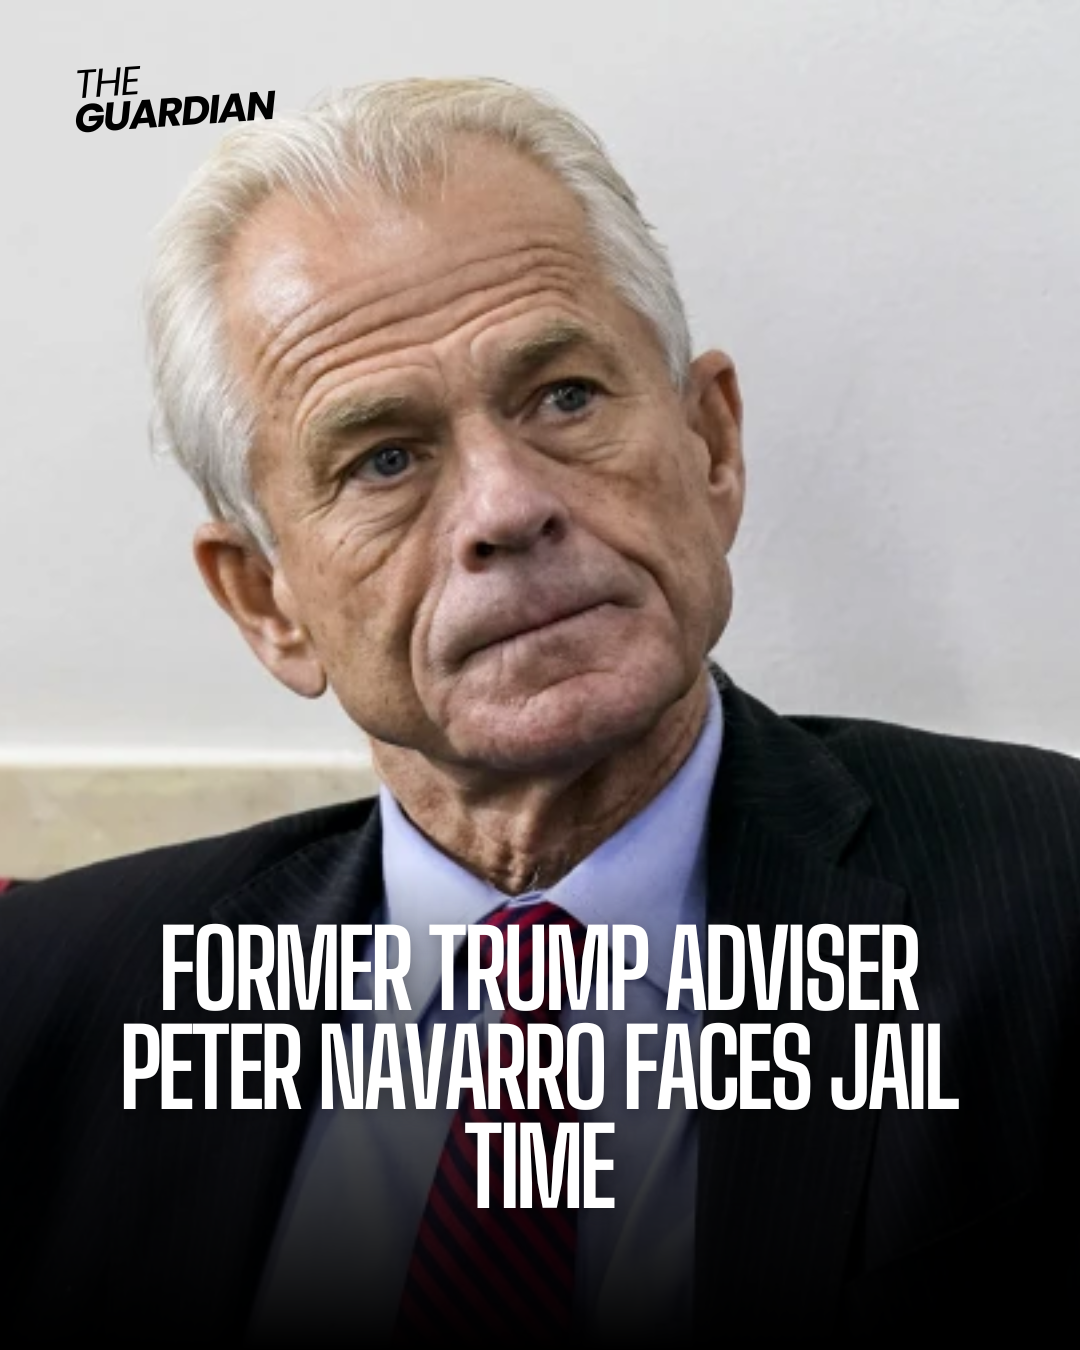 Peter Navarro is set to face jail time after Chief Justice John Roberts denied his emergency motion.